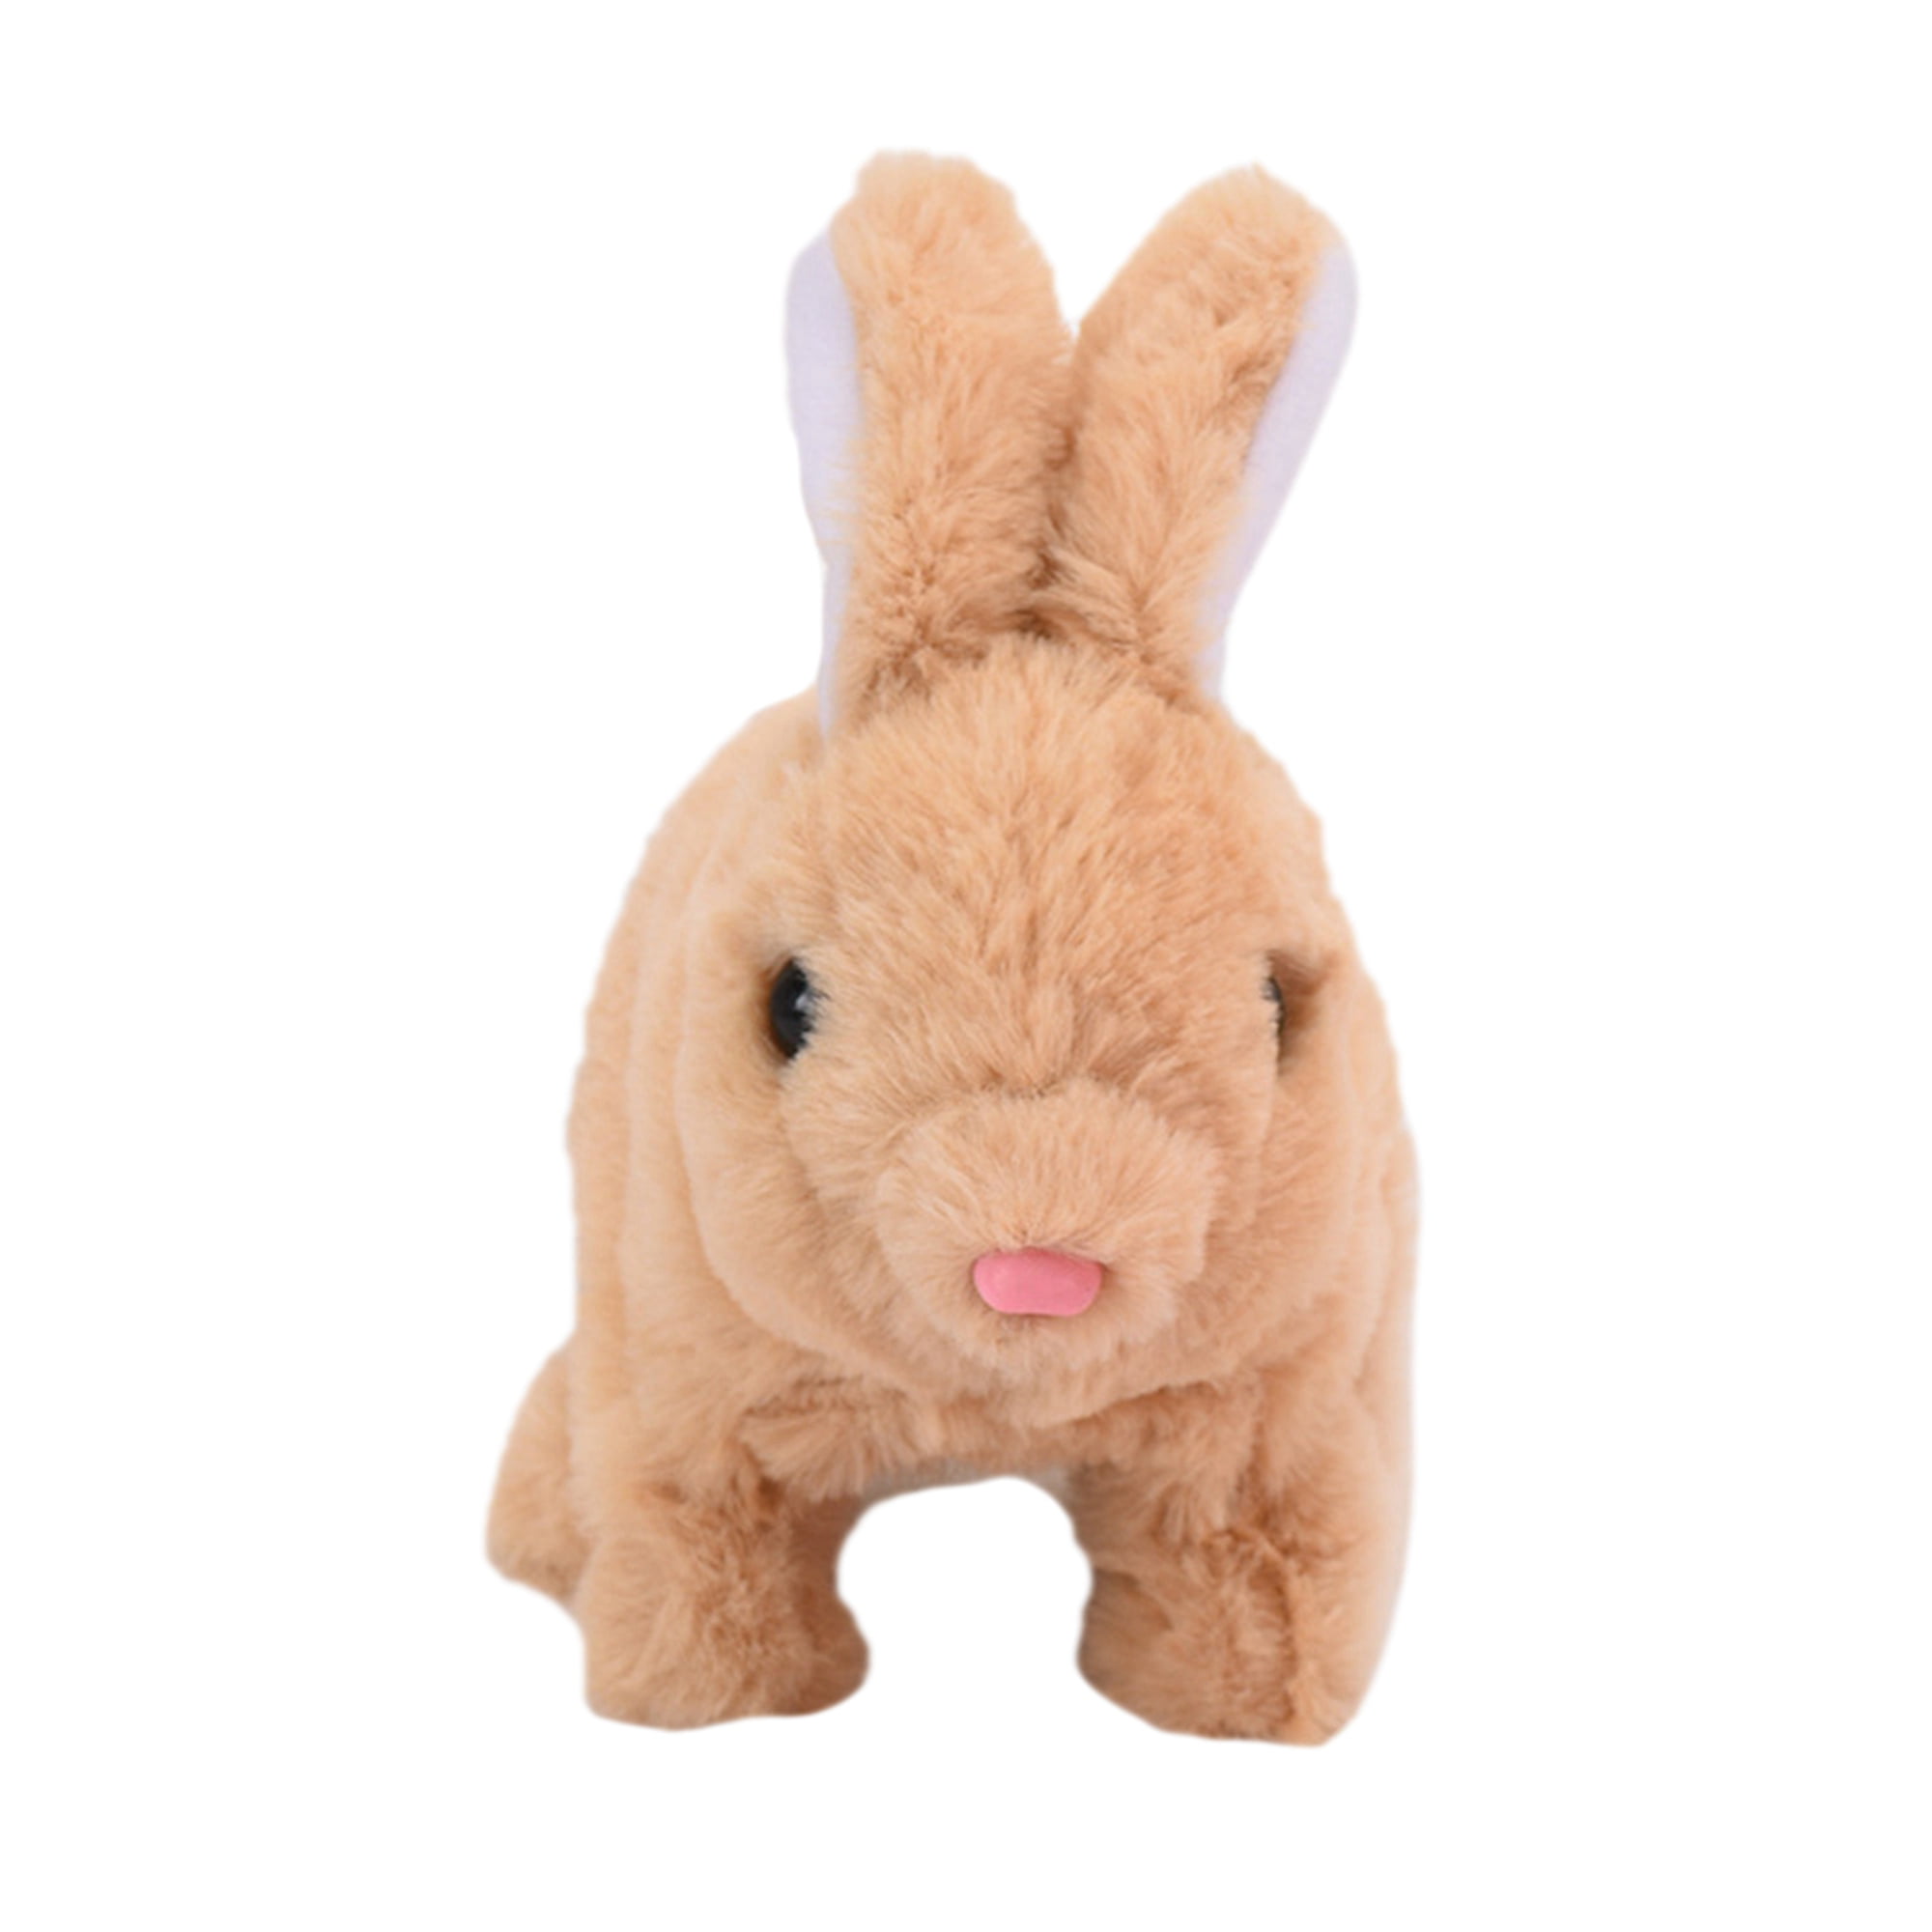 Details about   Cute Baby Kids Plush Soft Toy Stuffed Animal Lovely Rabbit Bunny Gifts Birthday 